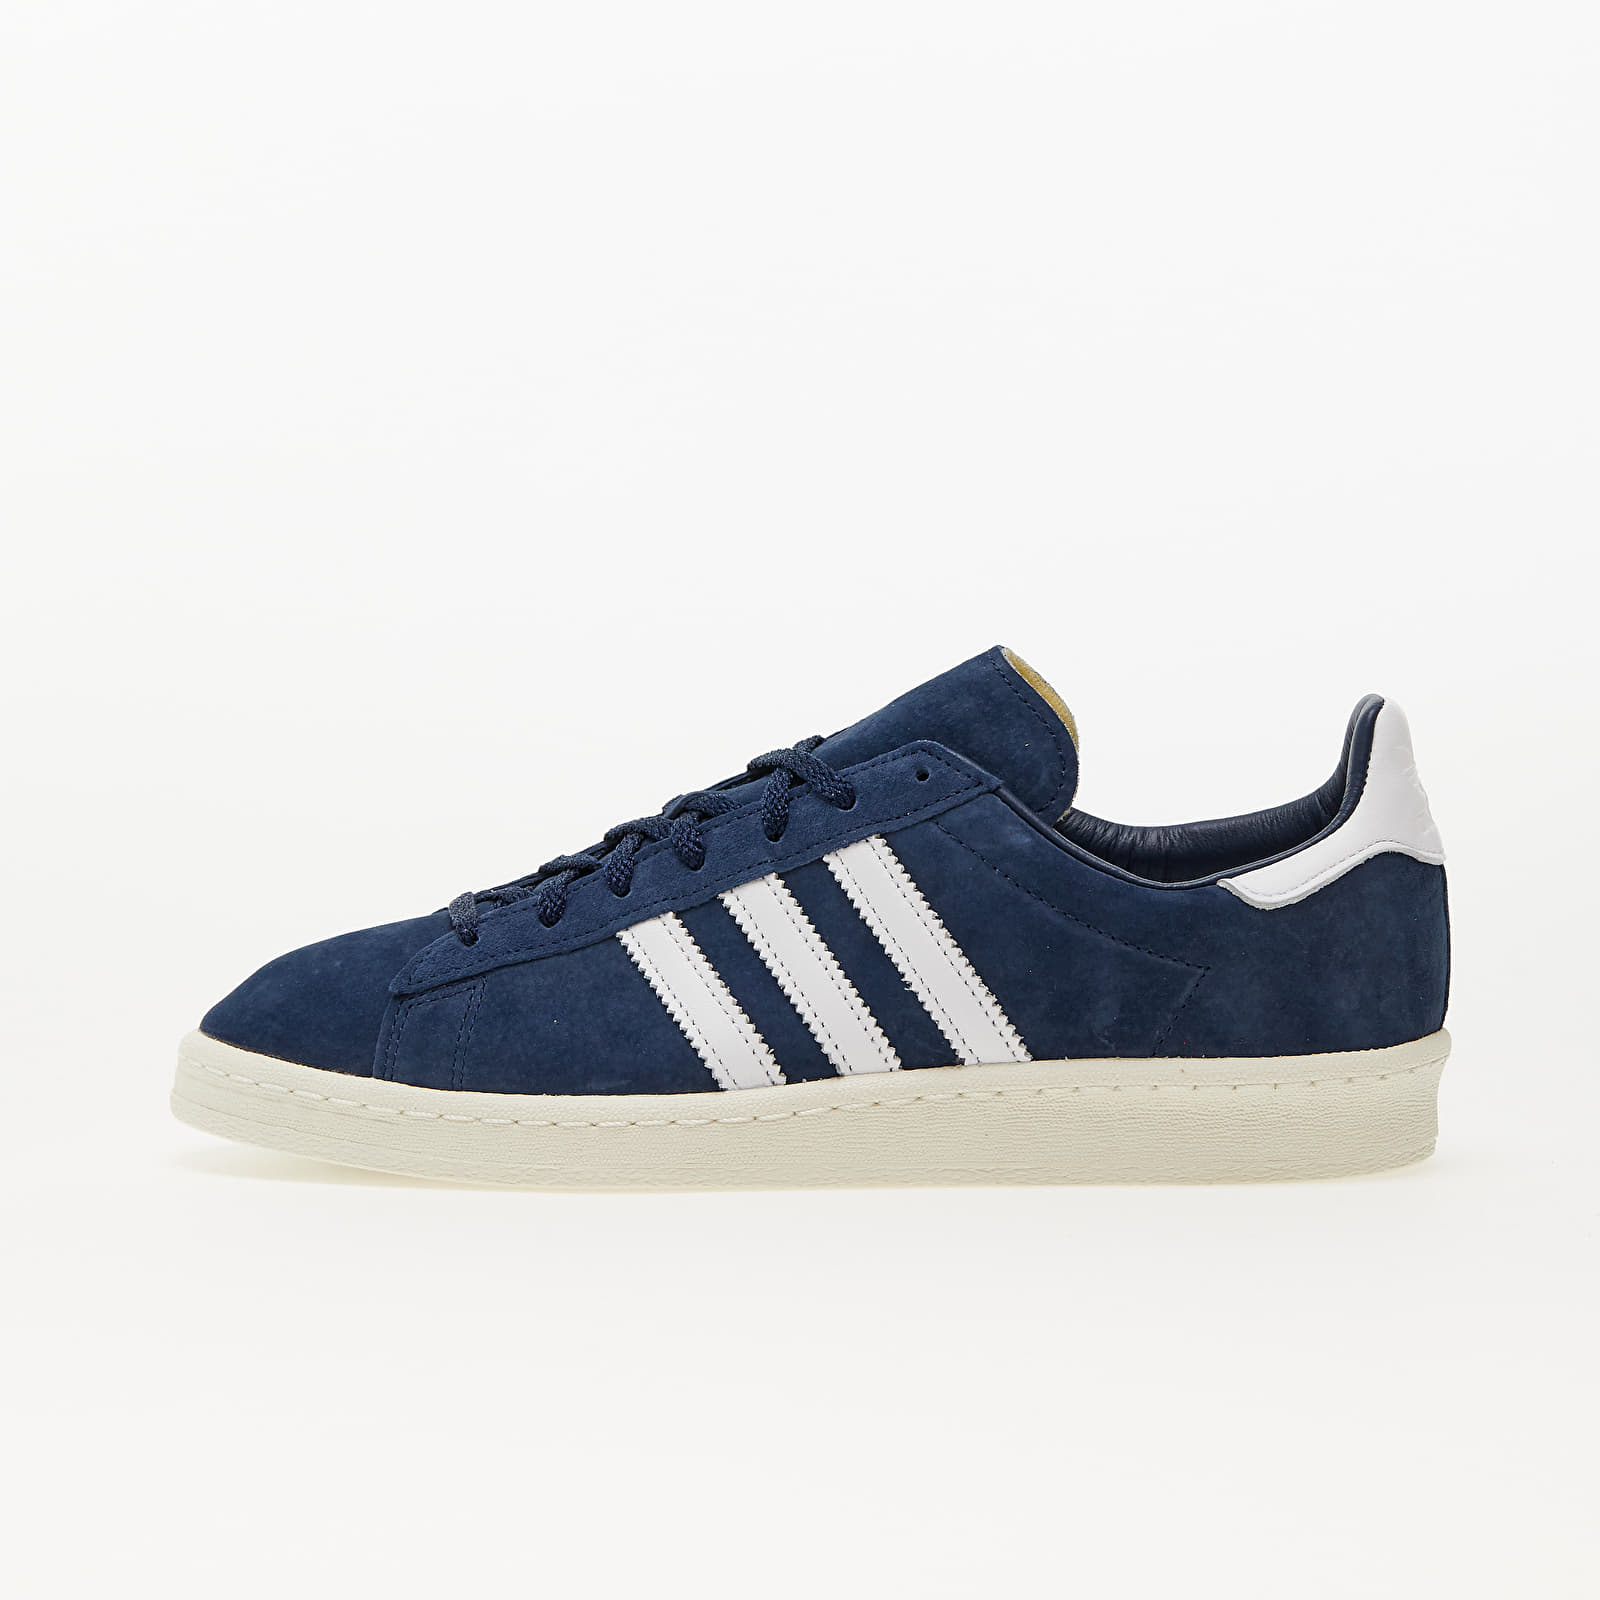 Men's sneakers and shoes adidas Originals Campus 80s Collegiate Navy/ Ftw White/ Off White